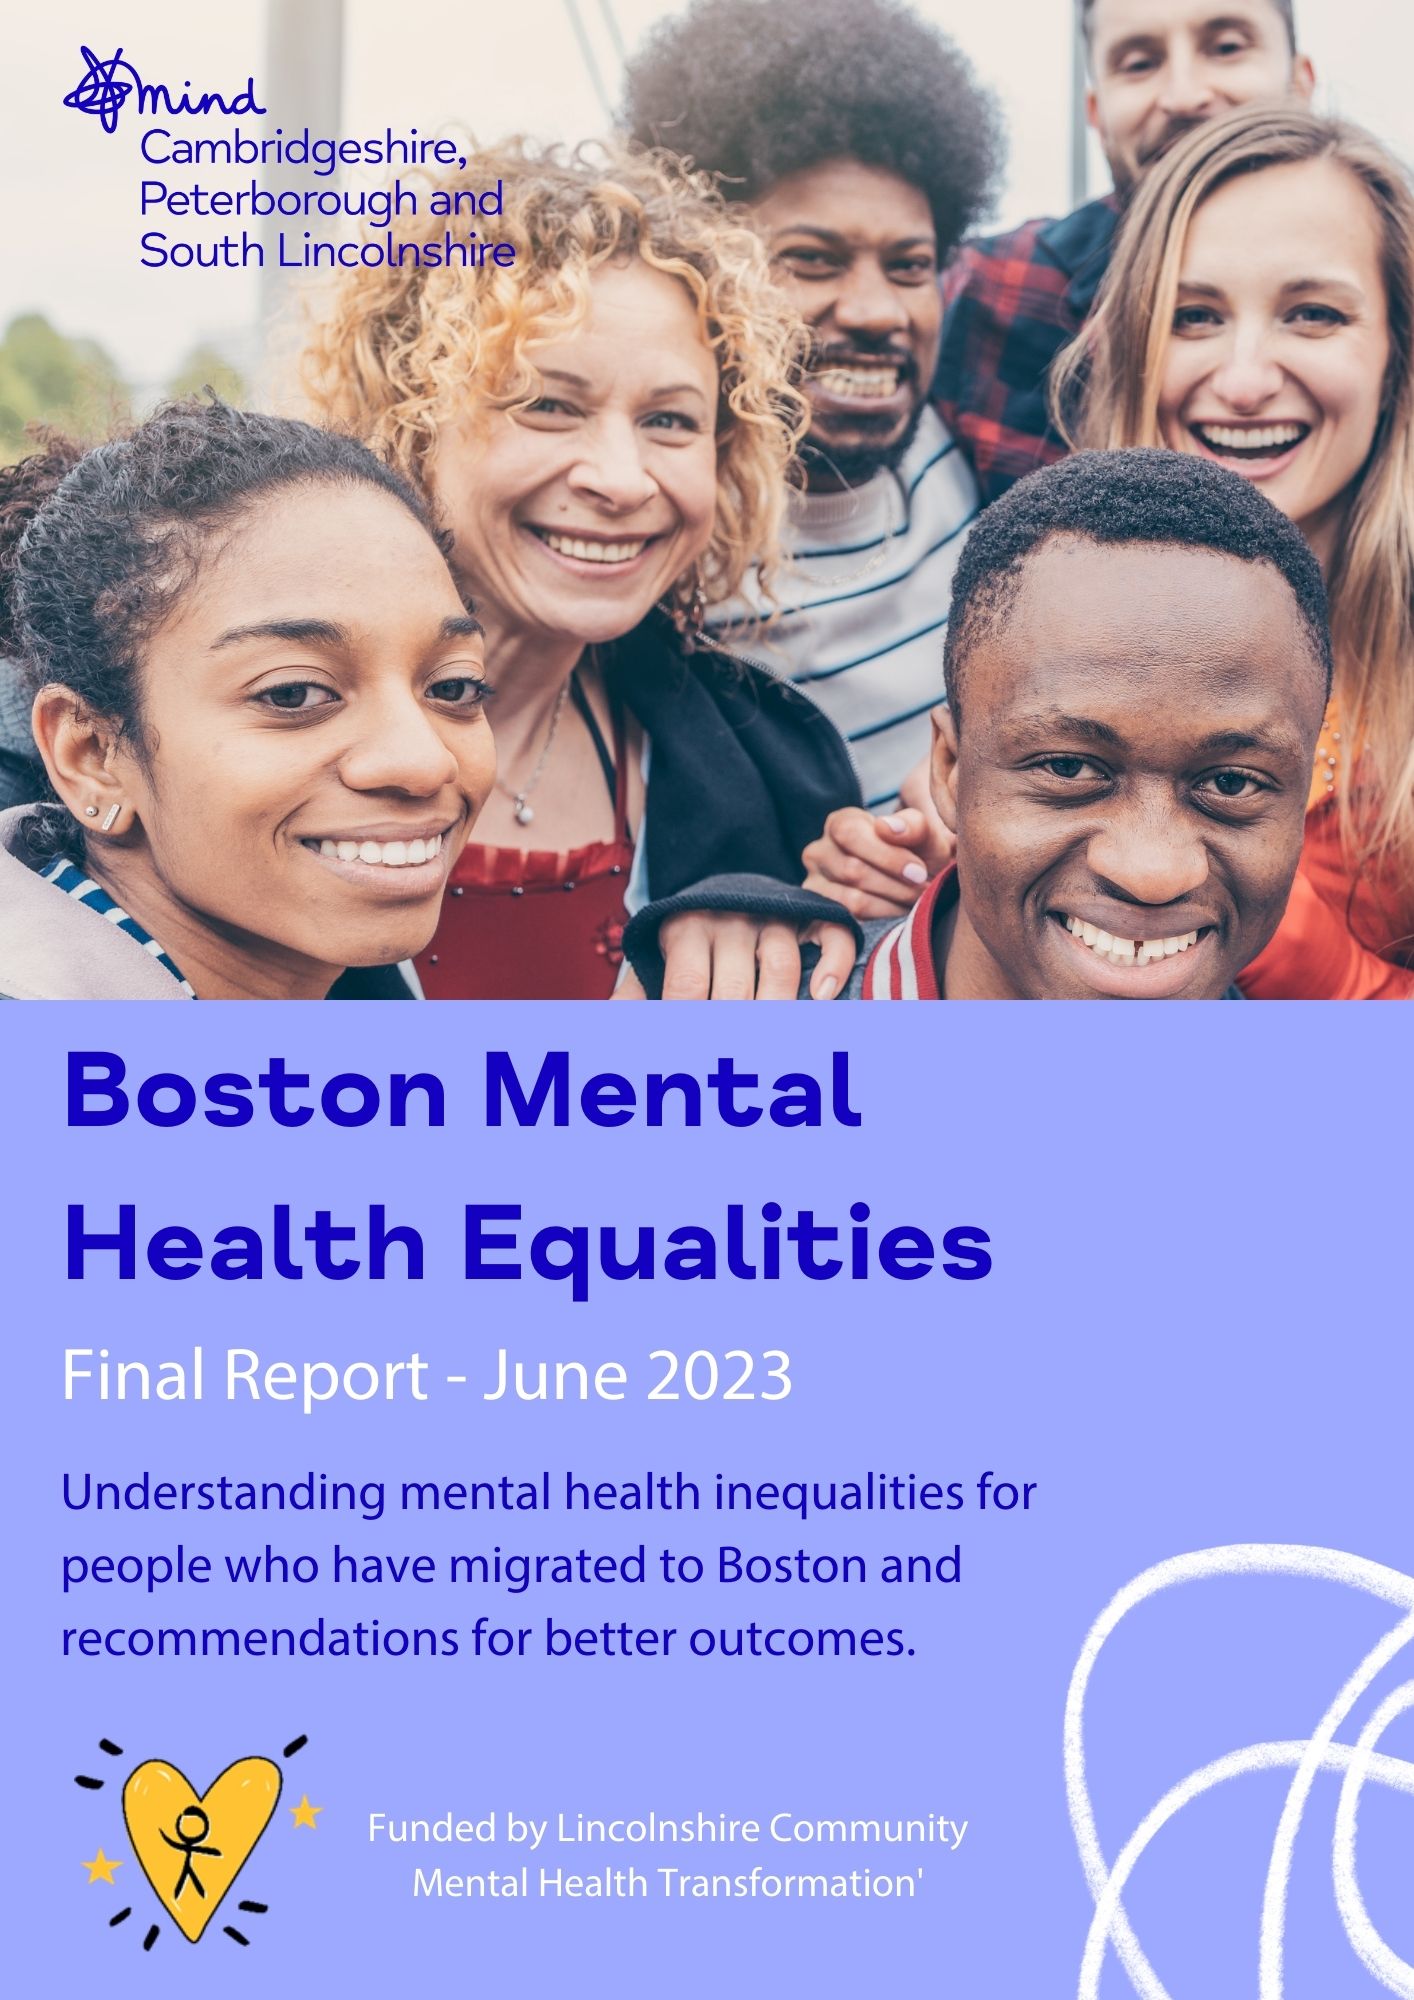 Boston Mental Health Equalities front page